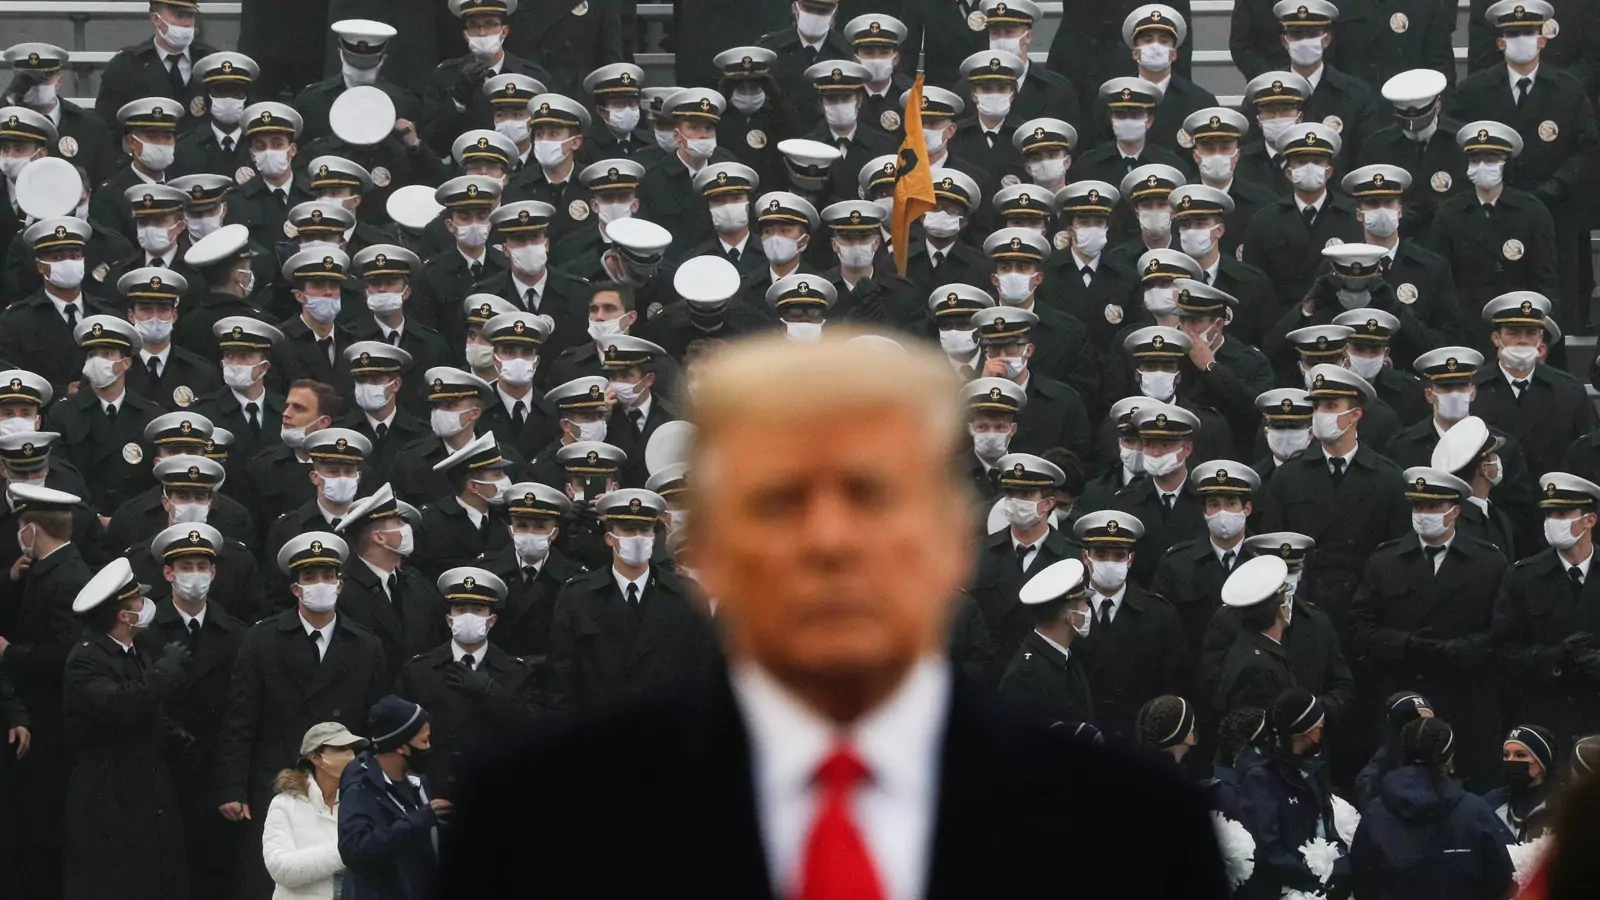 U.S. President Trump stands onto the field at Michie Stadium ahead of the annual Army-Navy collegiate football game.